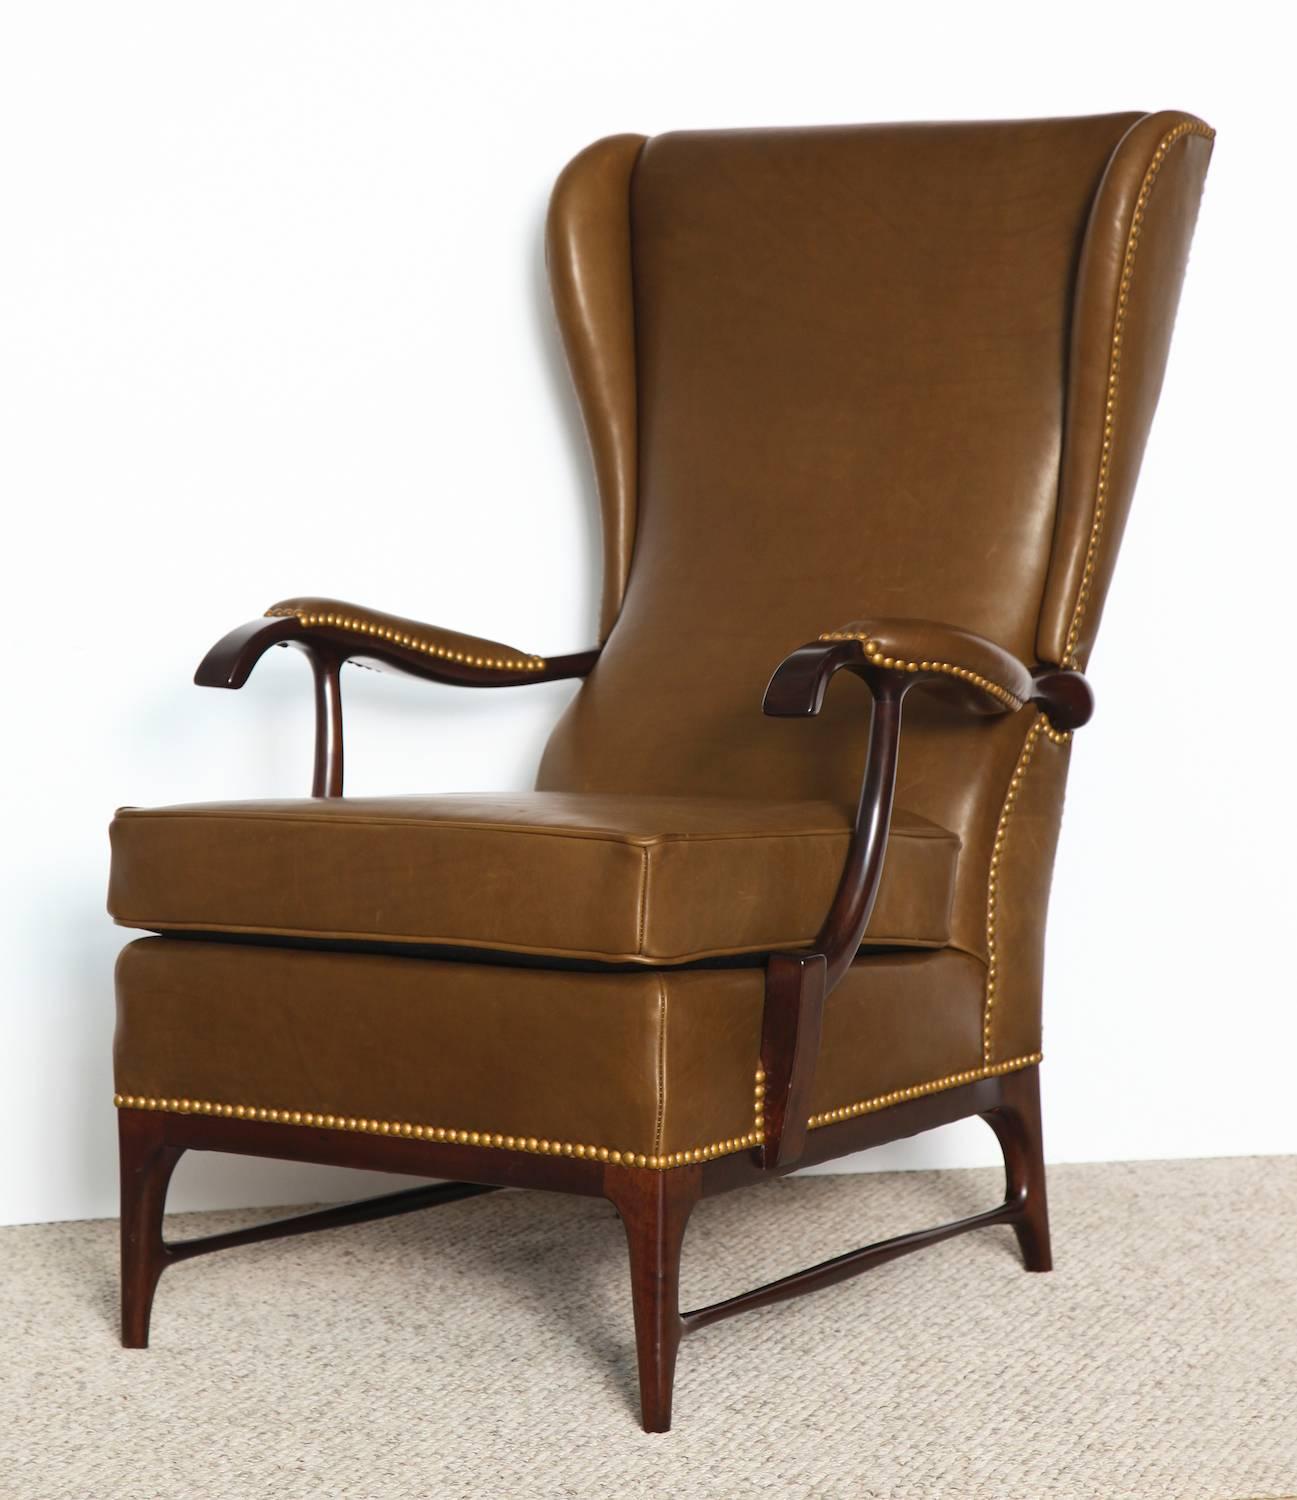 Pair of high back lounge chairs by Paolo Buffa.  Beautiful darkwood frames, newly upholstered in brown leather with nailhead trim. Great sculptural forms and intricate detailing.